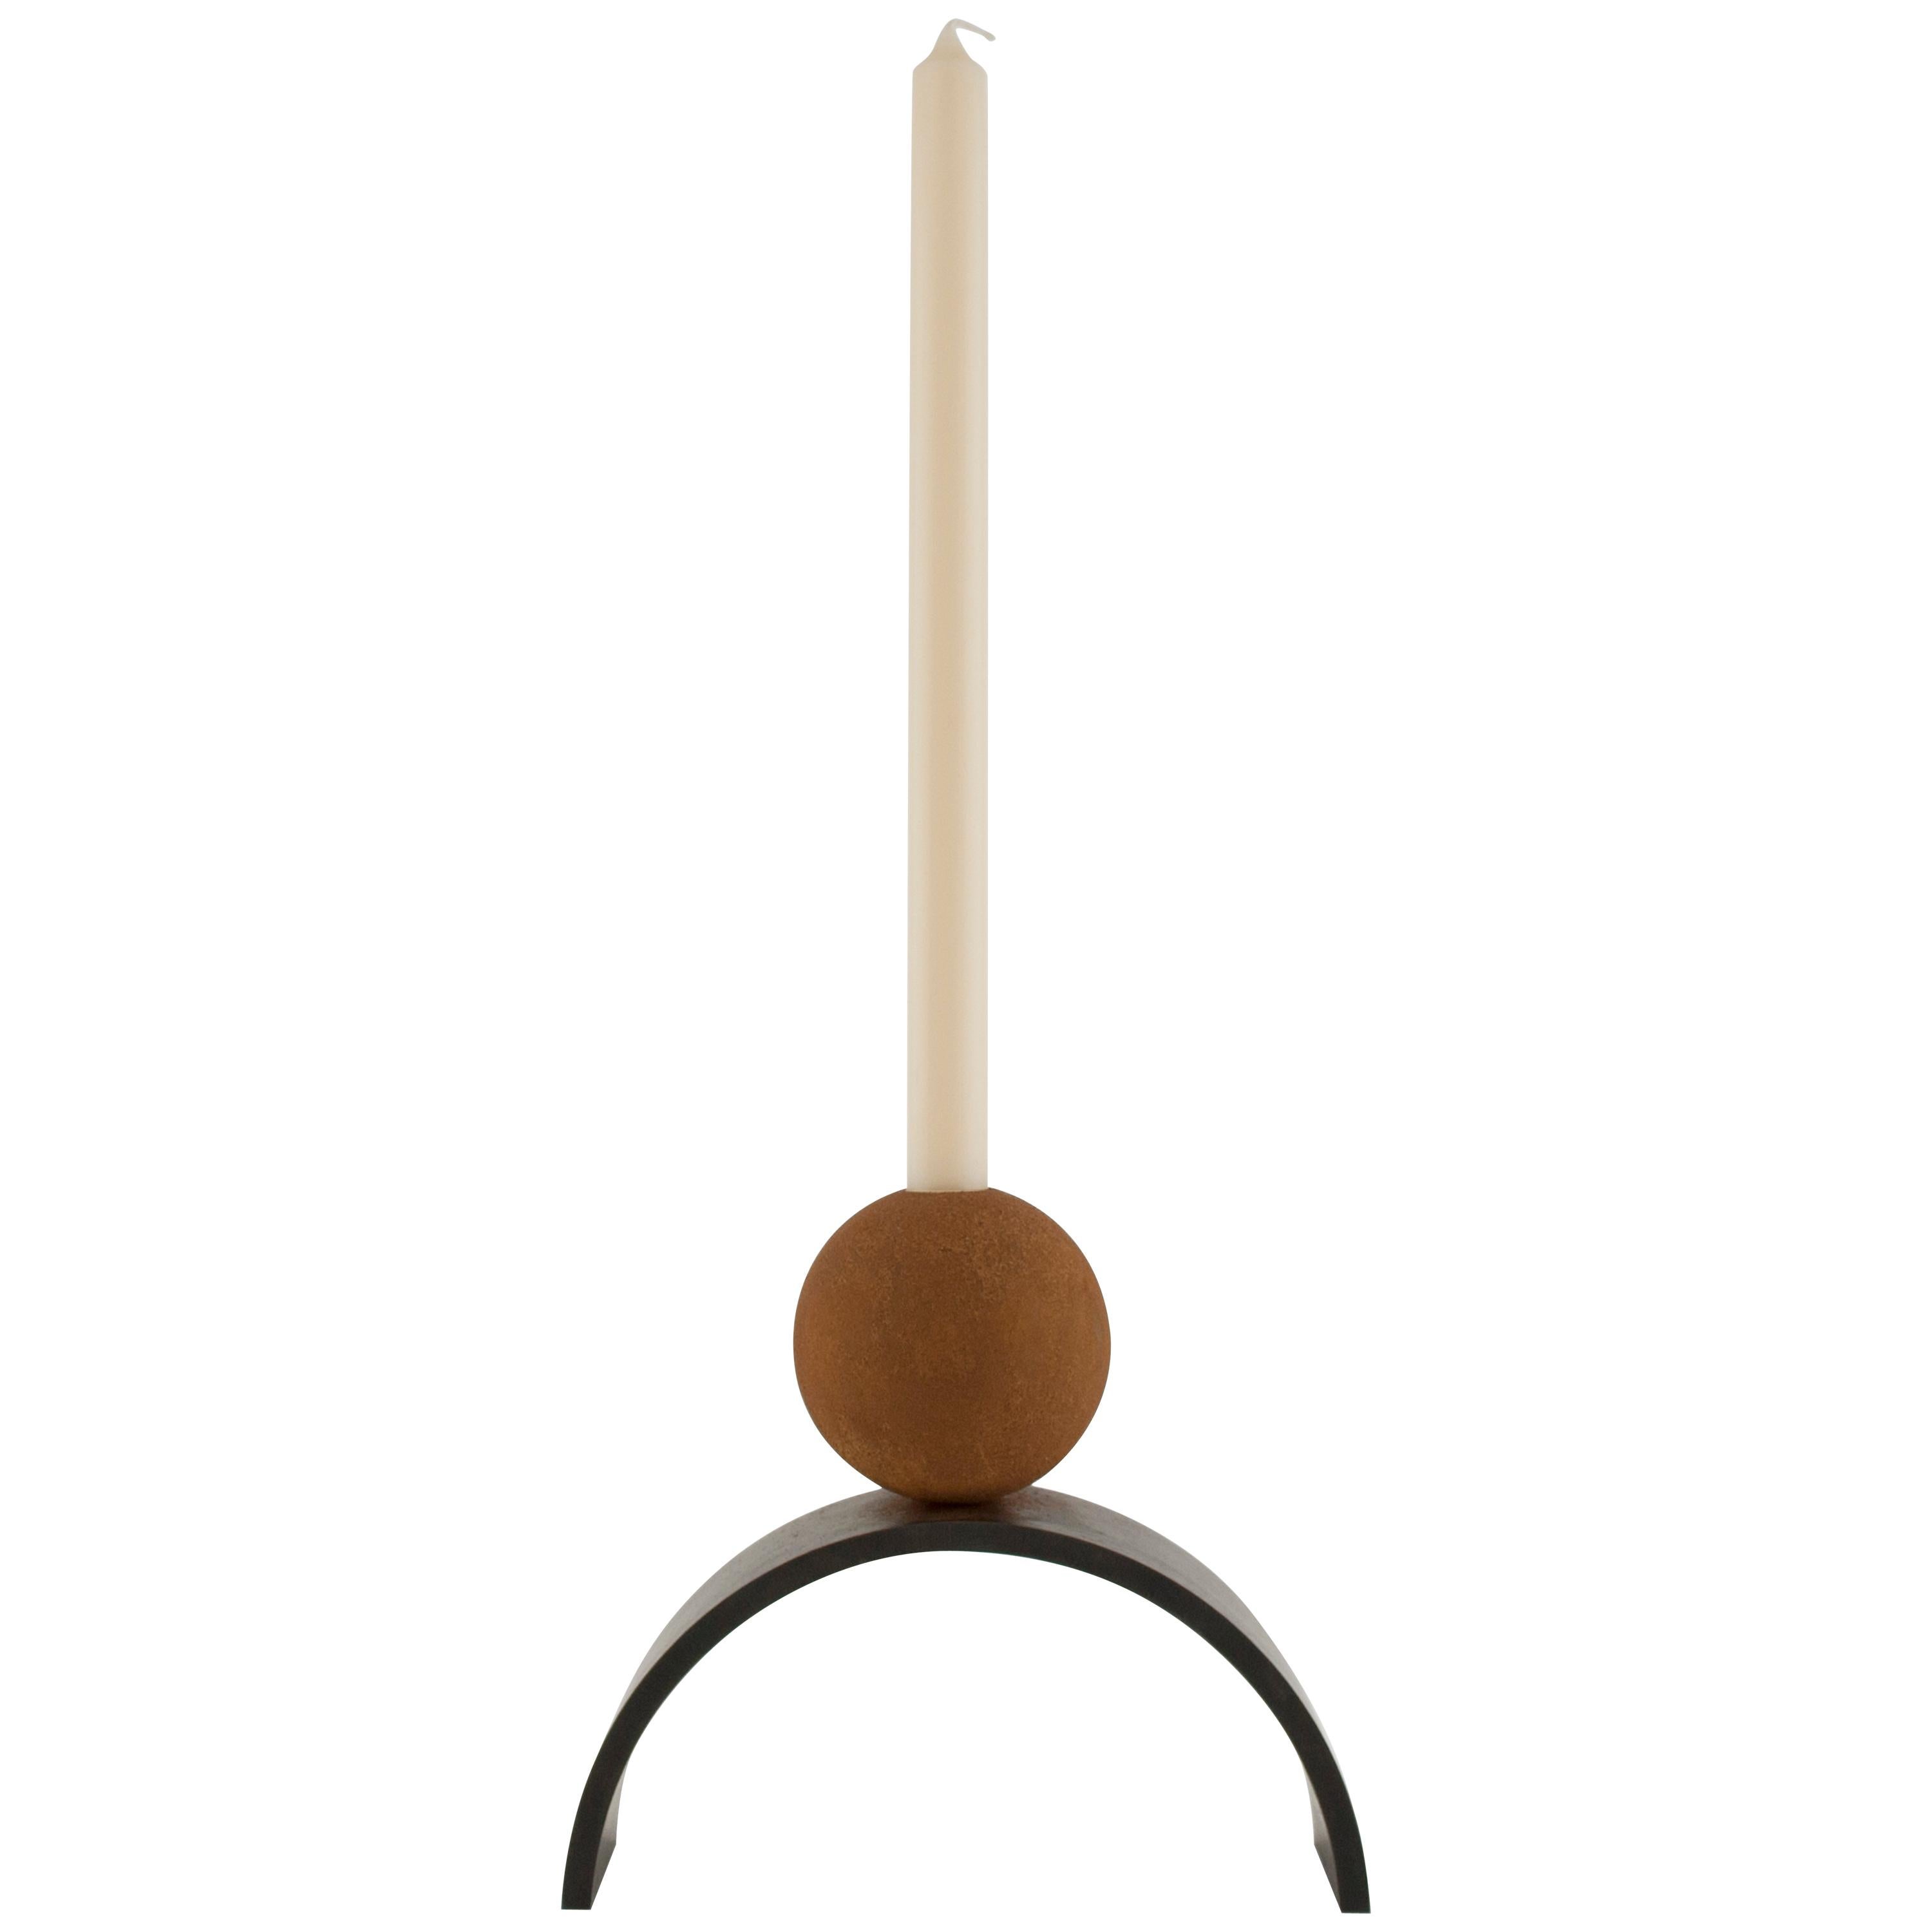 Contemporary Arch and Ball Extra Large Candleholder